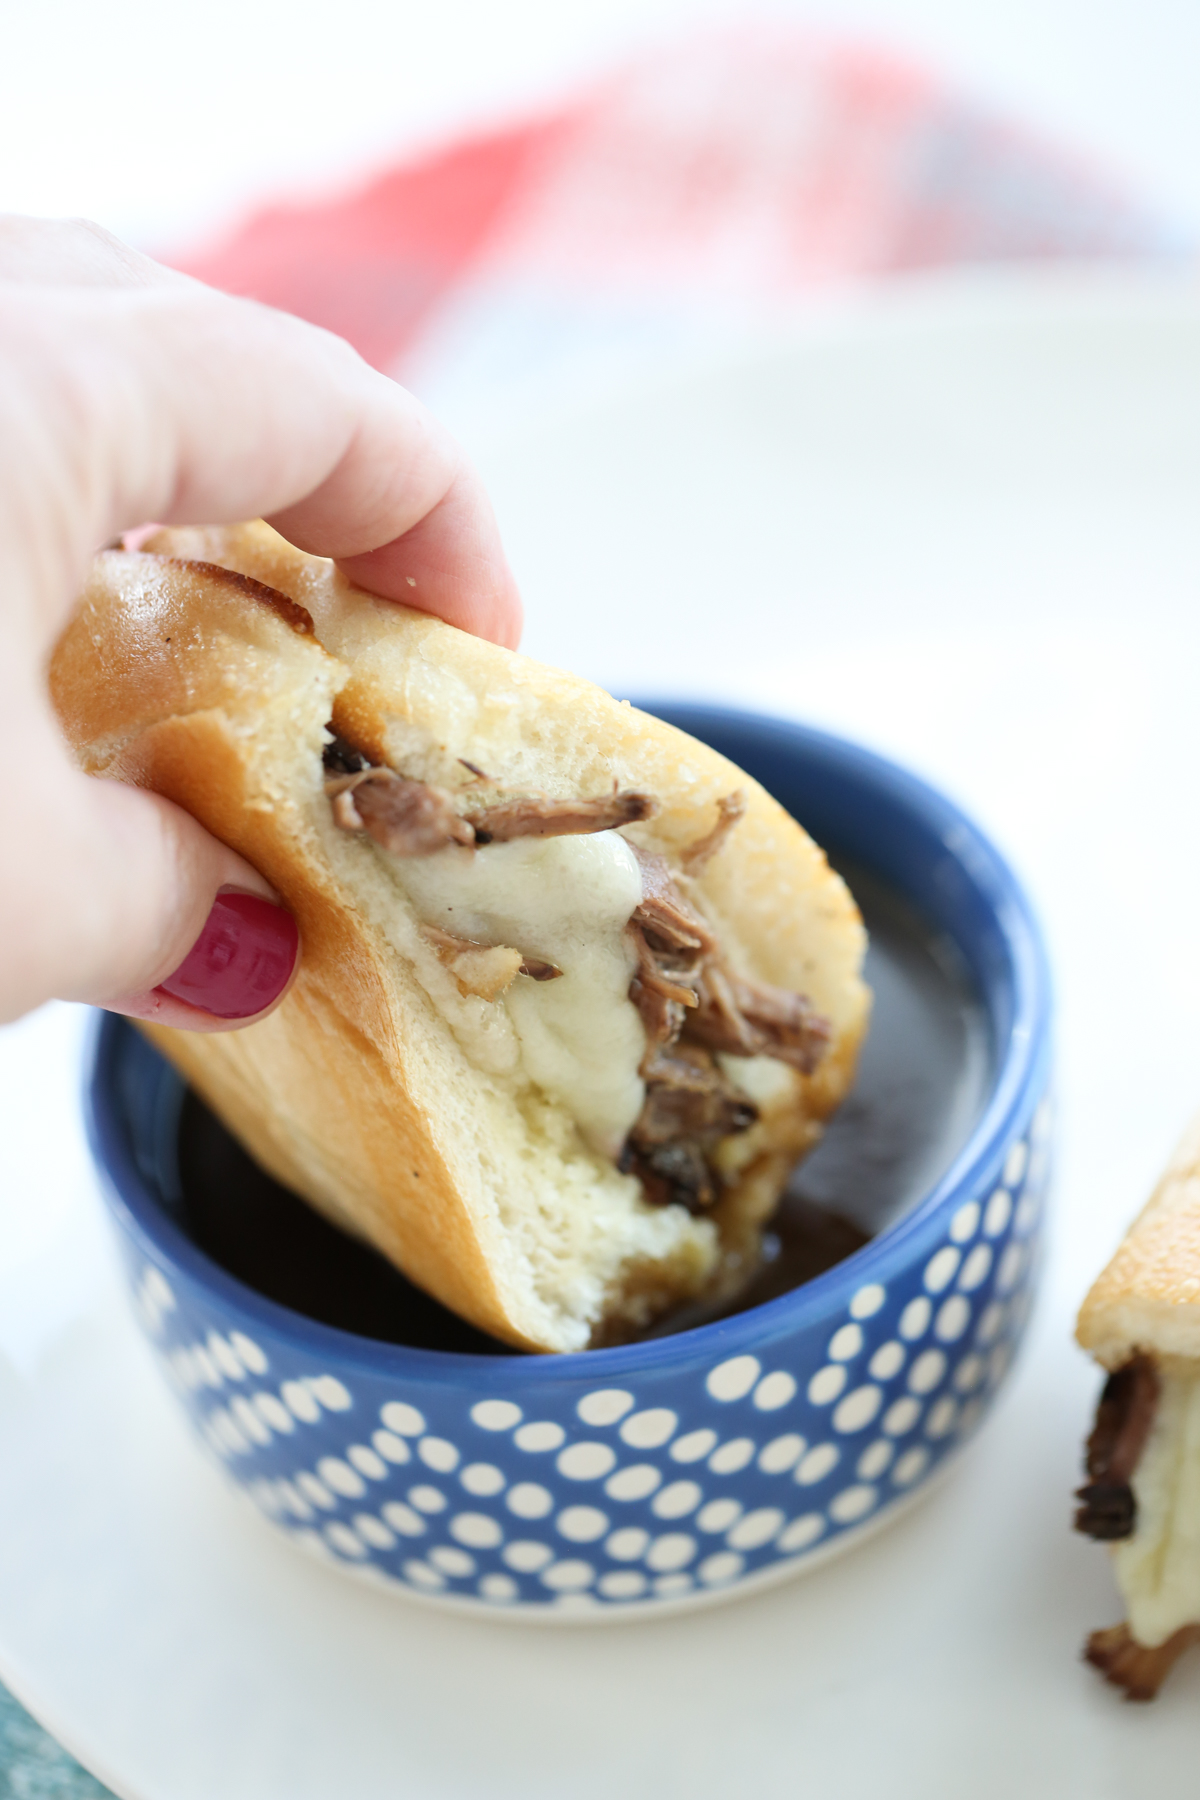 A sandwich with beef and cheese being dipped in au jus.